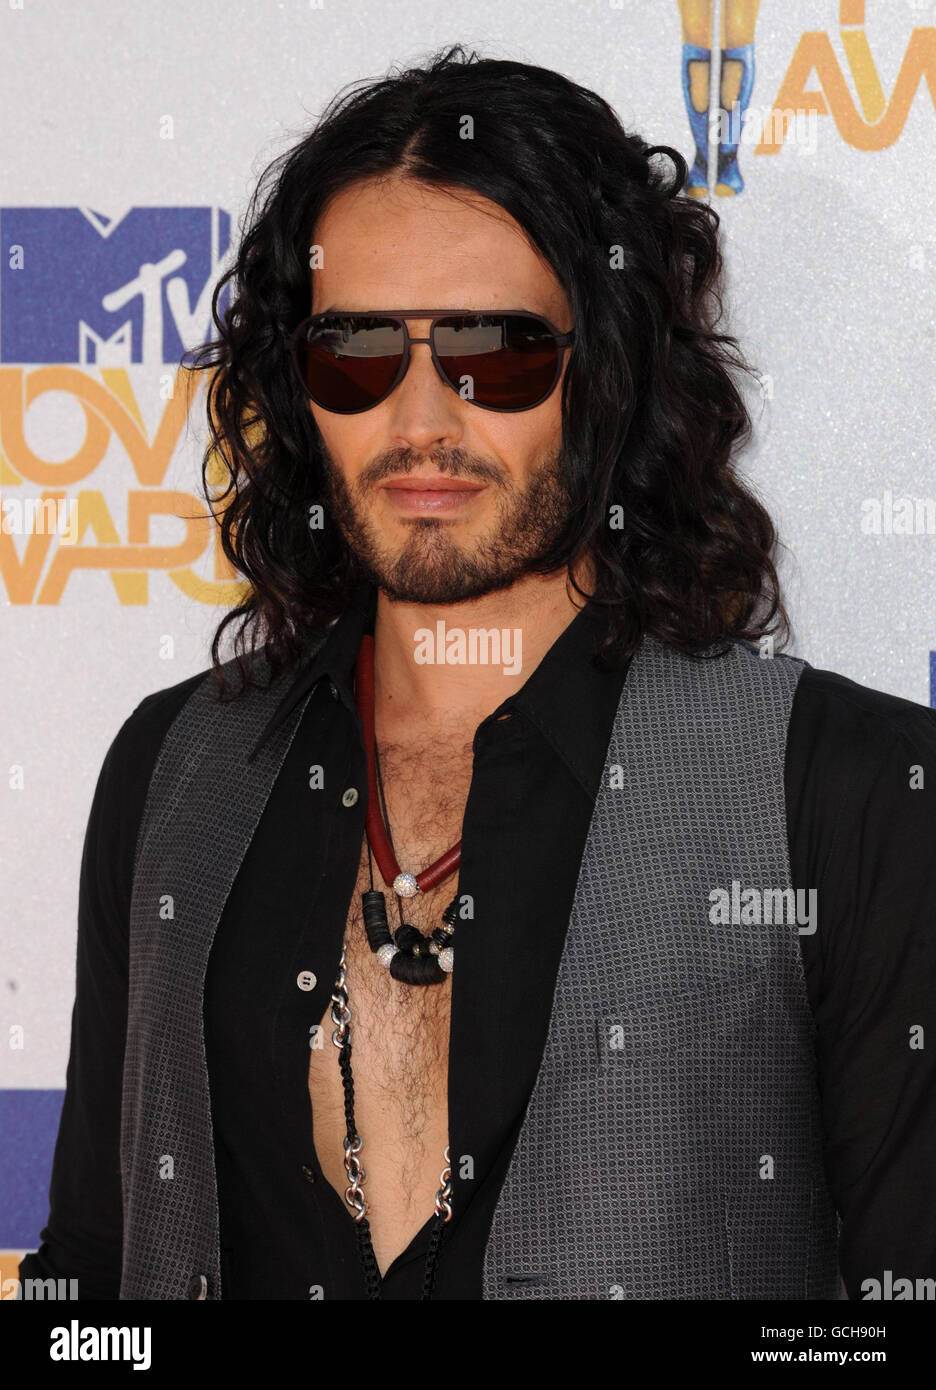 Russell Brand arrives for The 2010 MTV Movie Awards, Universal Studios, Los Angeles. Stock Photo